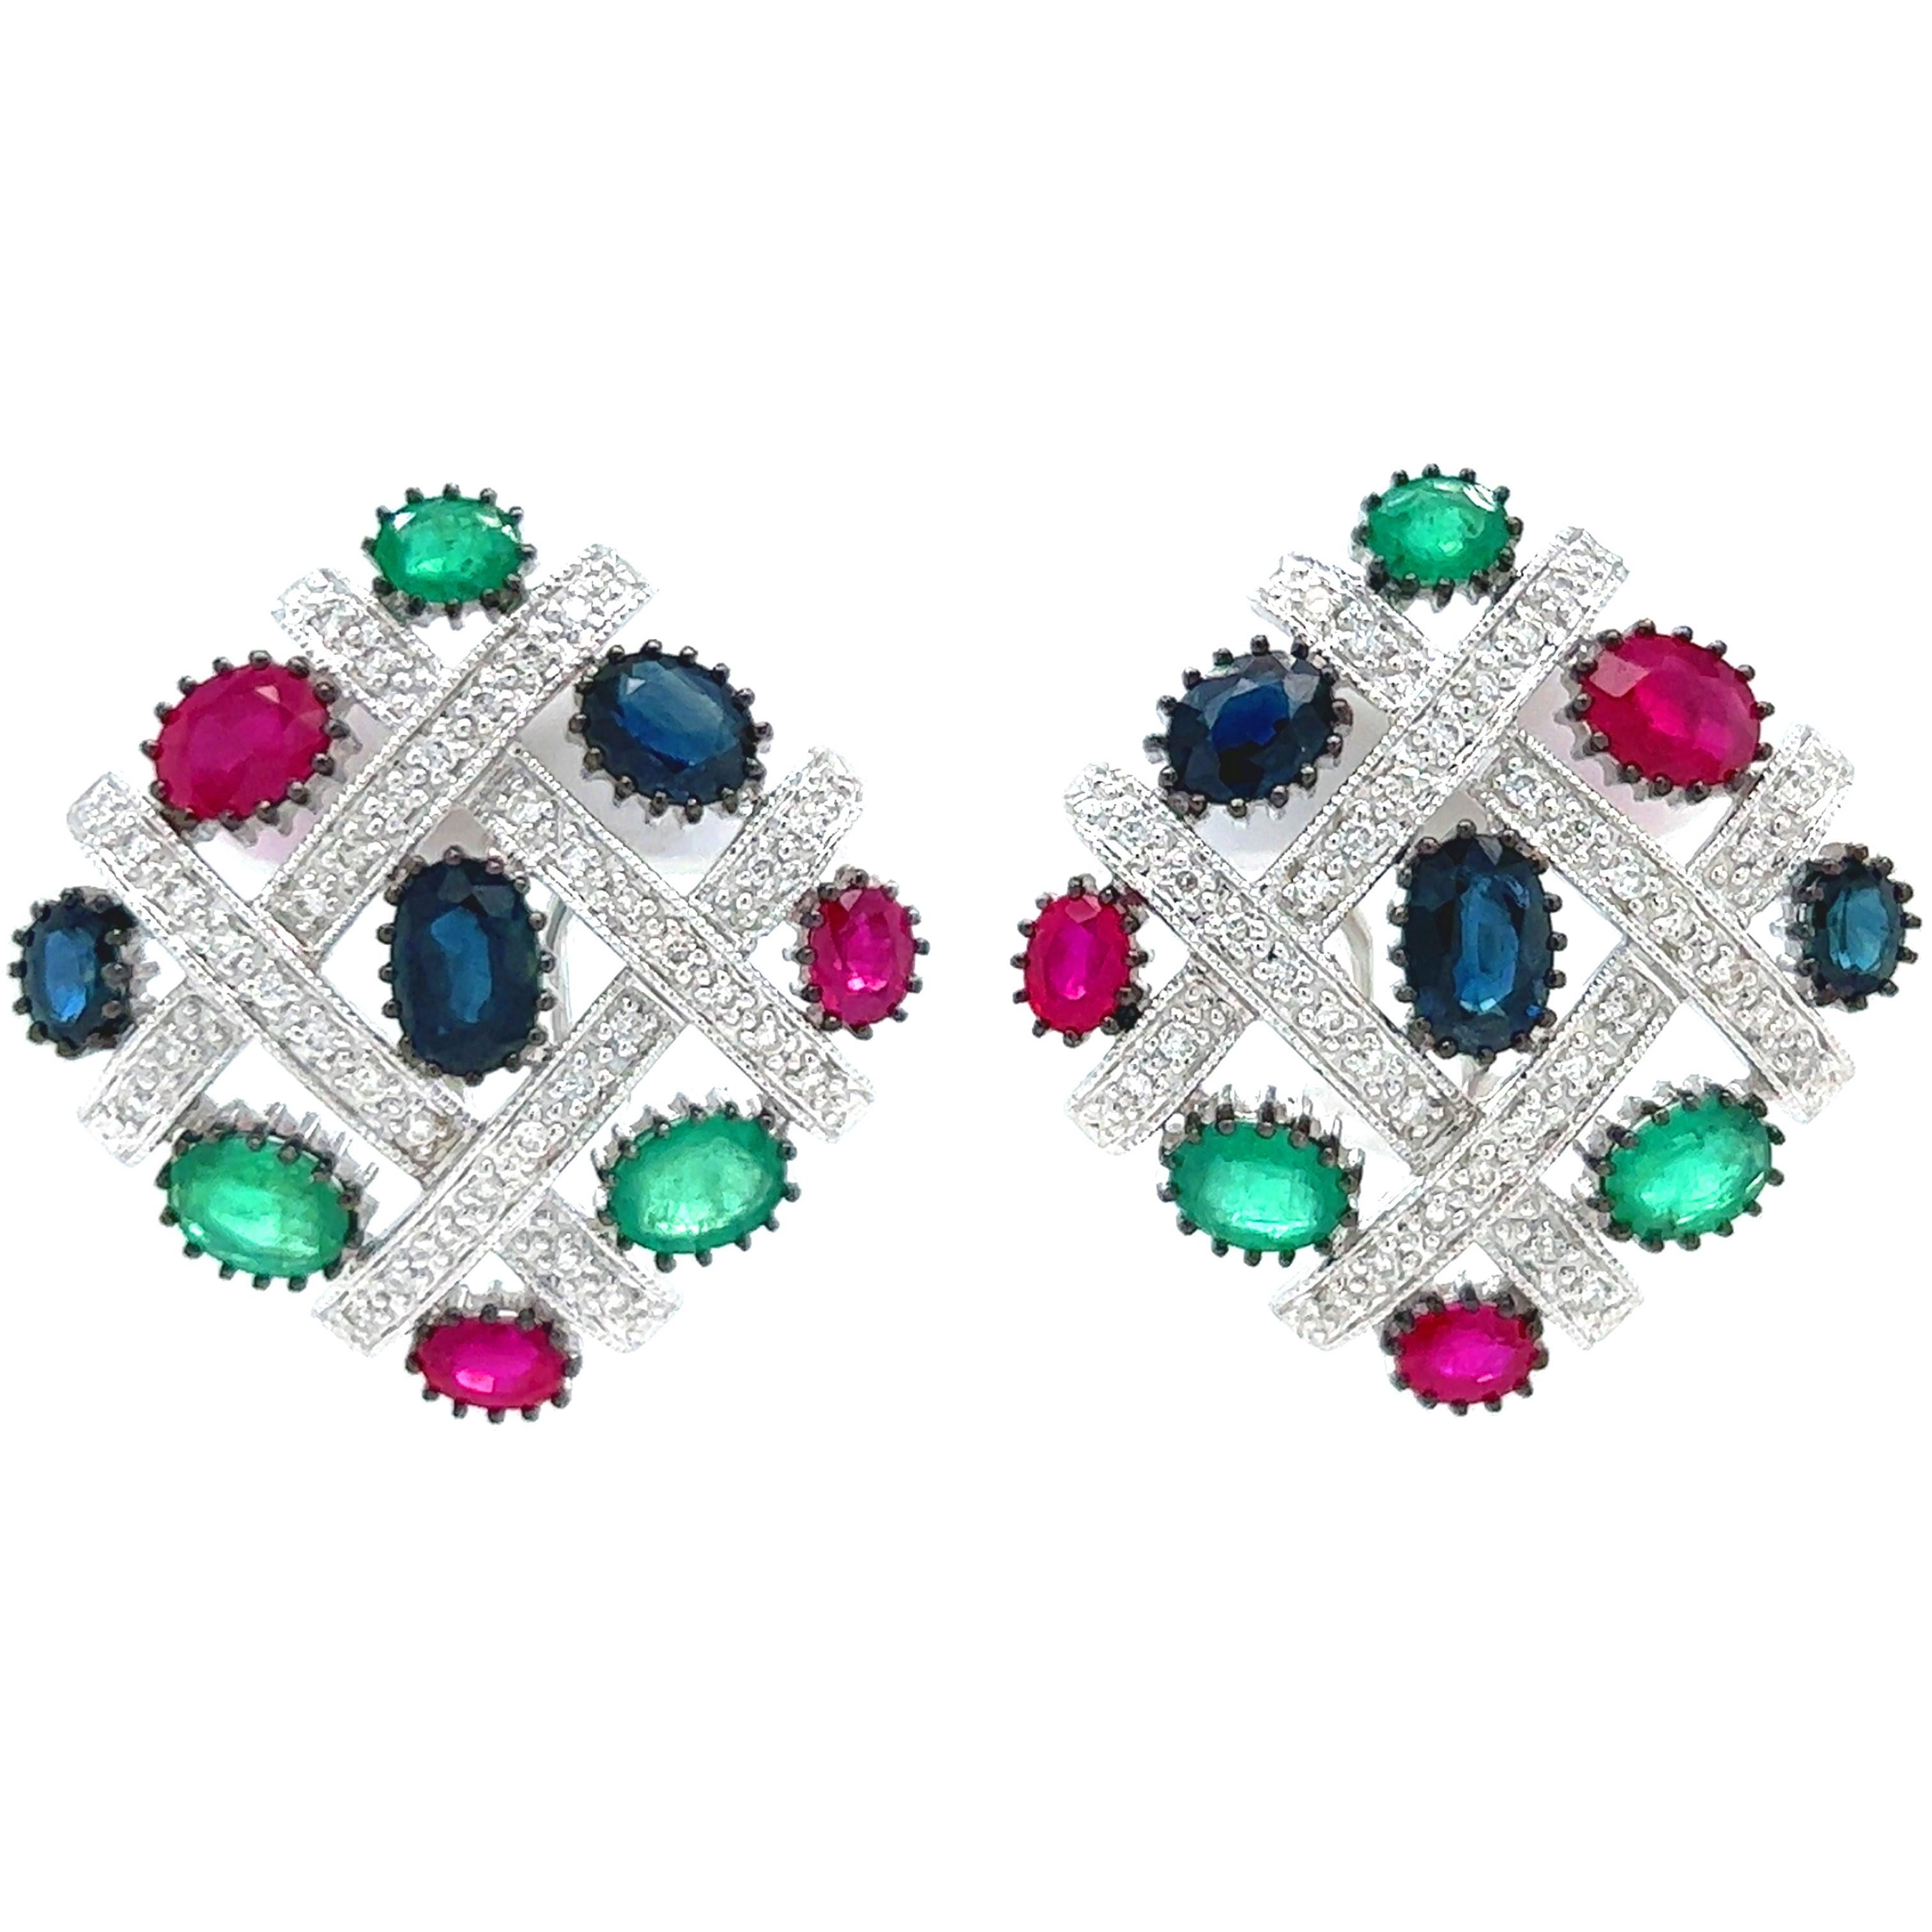 18K White Gold Diamond Emerald Ruby Sapphire Earrings

A gorgeous pair of earrings featuring colombian emeralds, rubys and blue sapphires.

Apprx. 1.50ct. each Colombian Emerald, Ruby, Sapphire.

0.60ct. diamonds total weight

Earrings measure 1.05